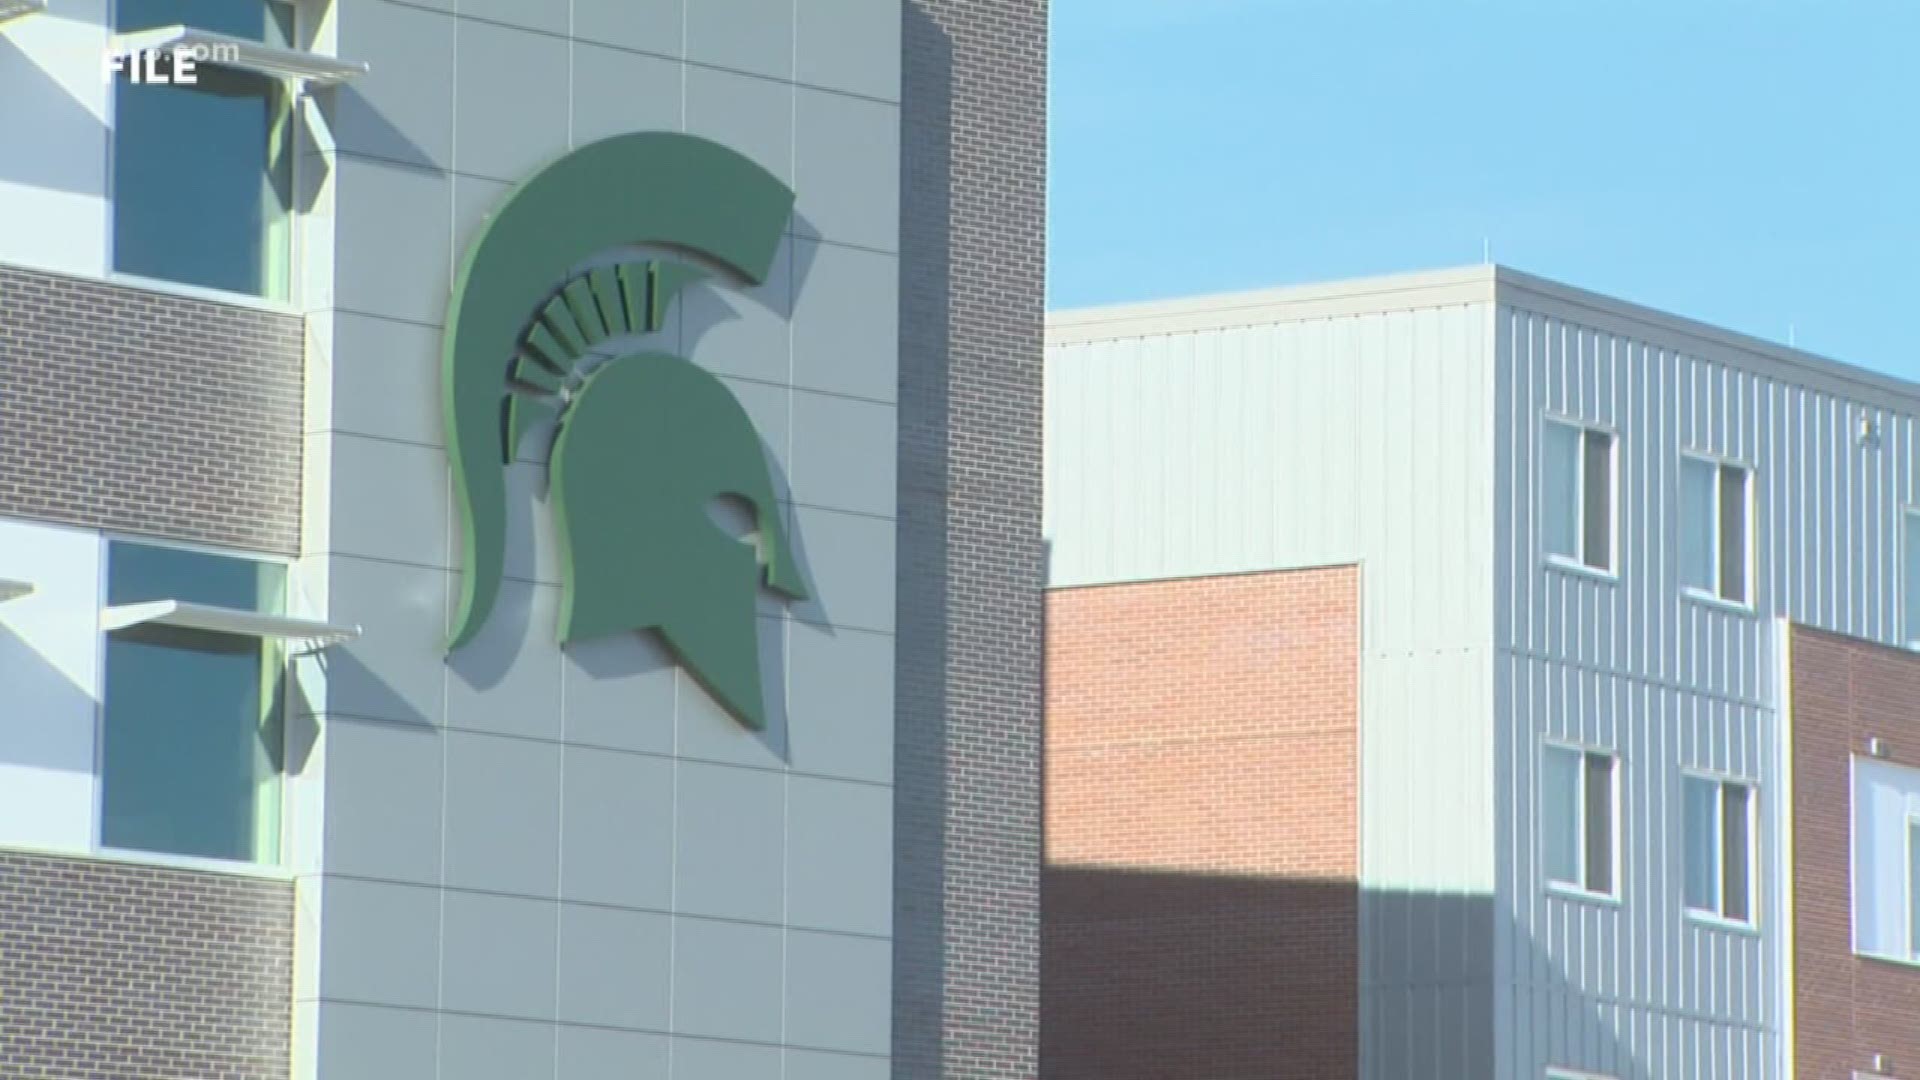 MSU stops payments to Nassar victims over fraud concerns